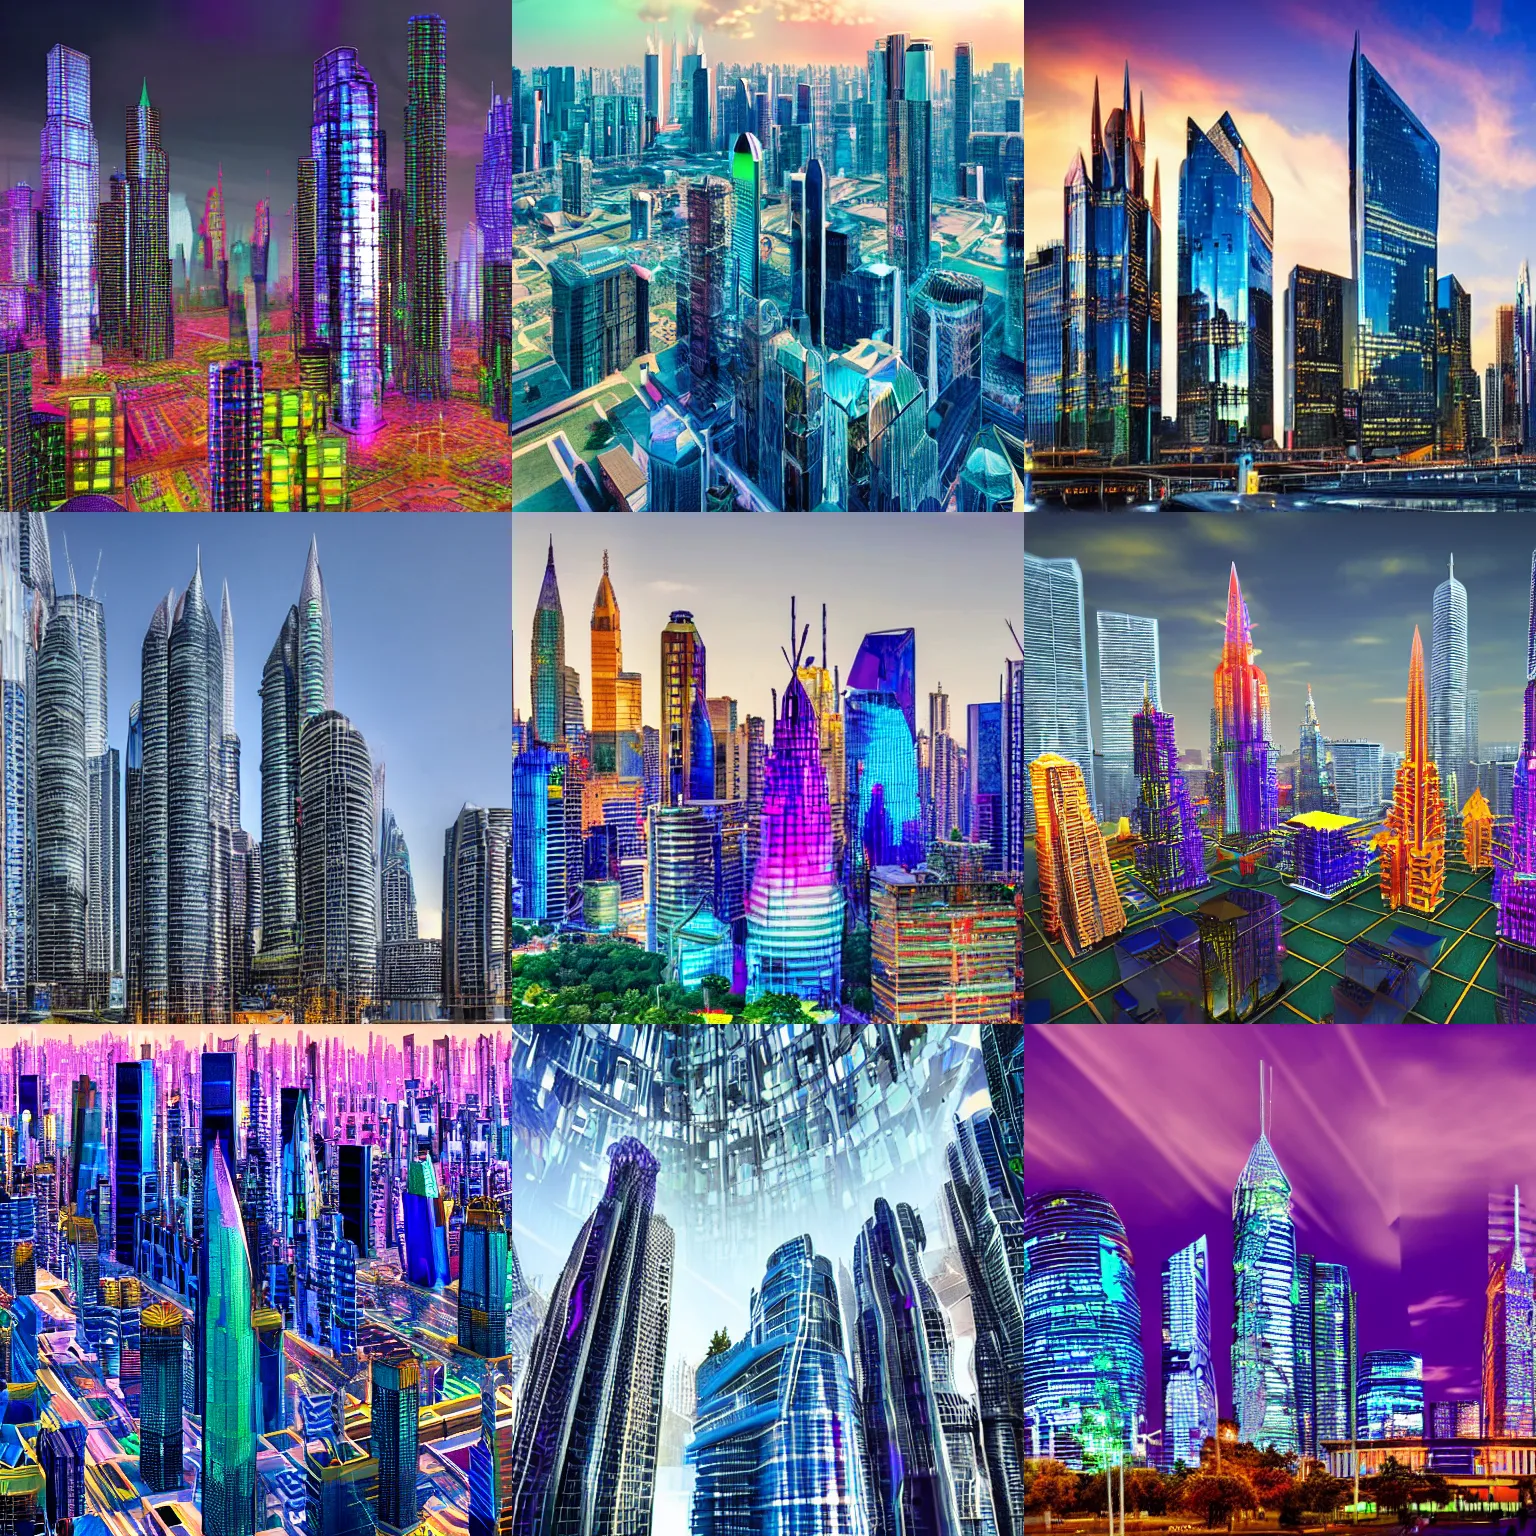 Prompt: an epic futuristic colorful crystal city with many spires and skyscrapers